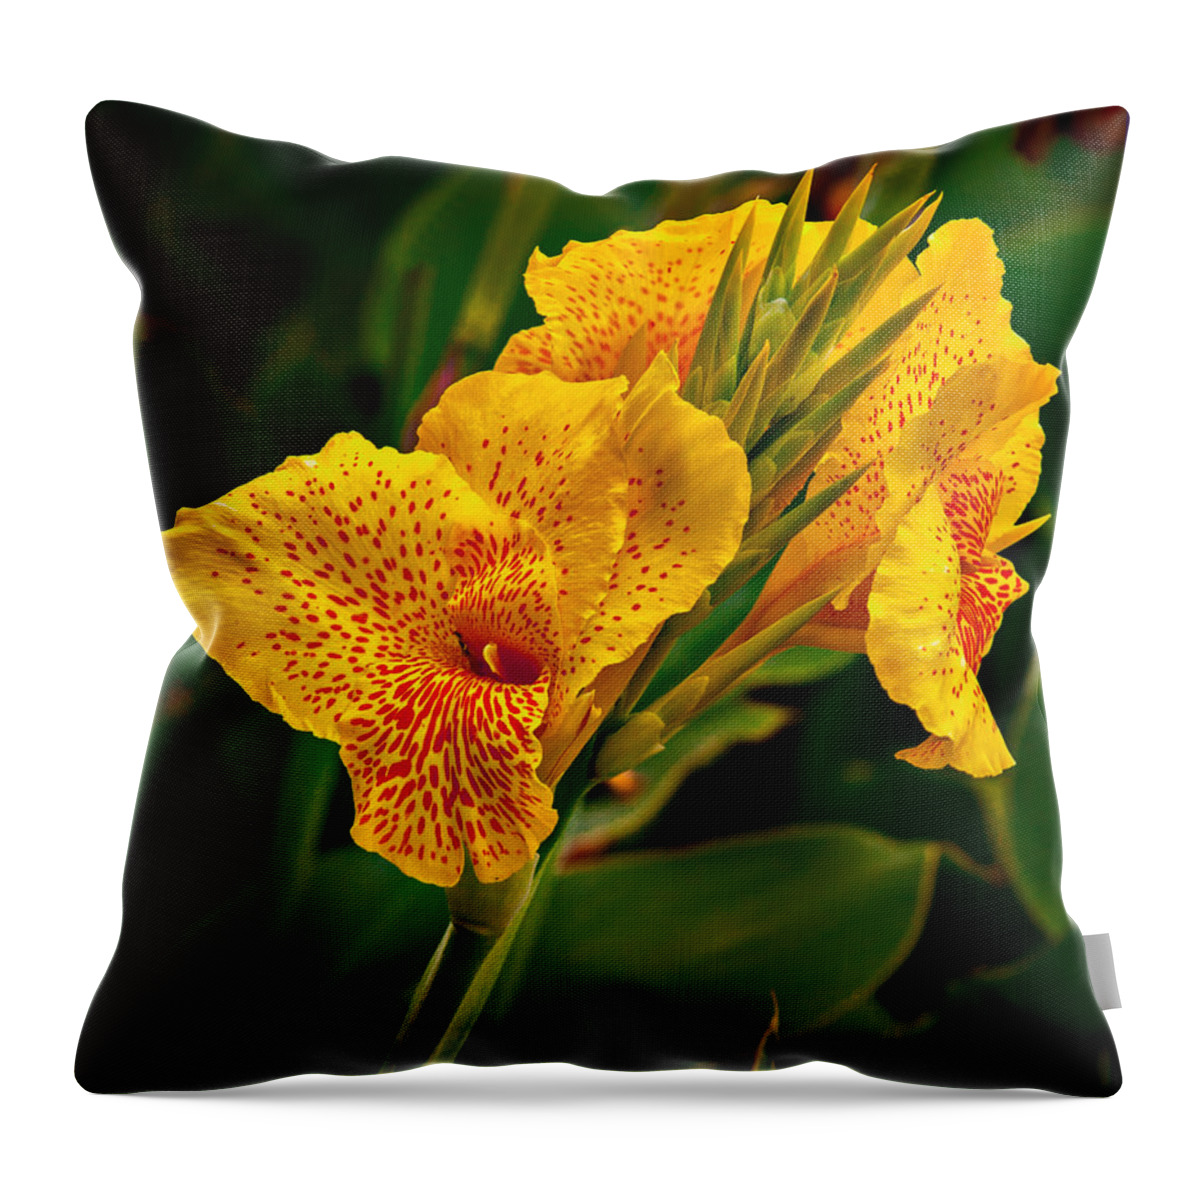 Canna Throw Pillow featuring the photograph Canna Blossom by Mary Jo Allen